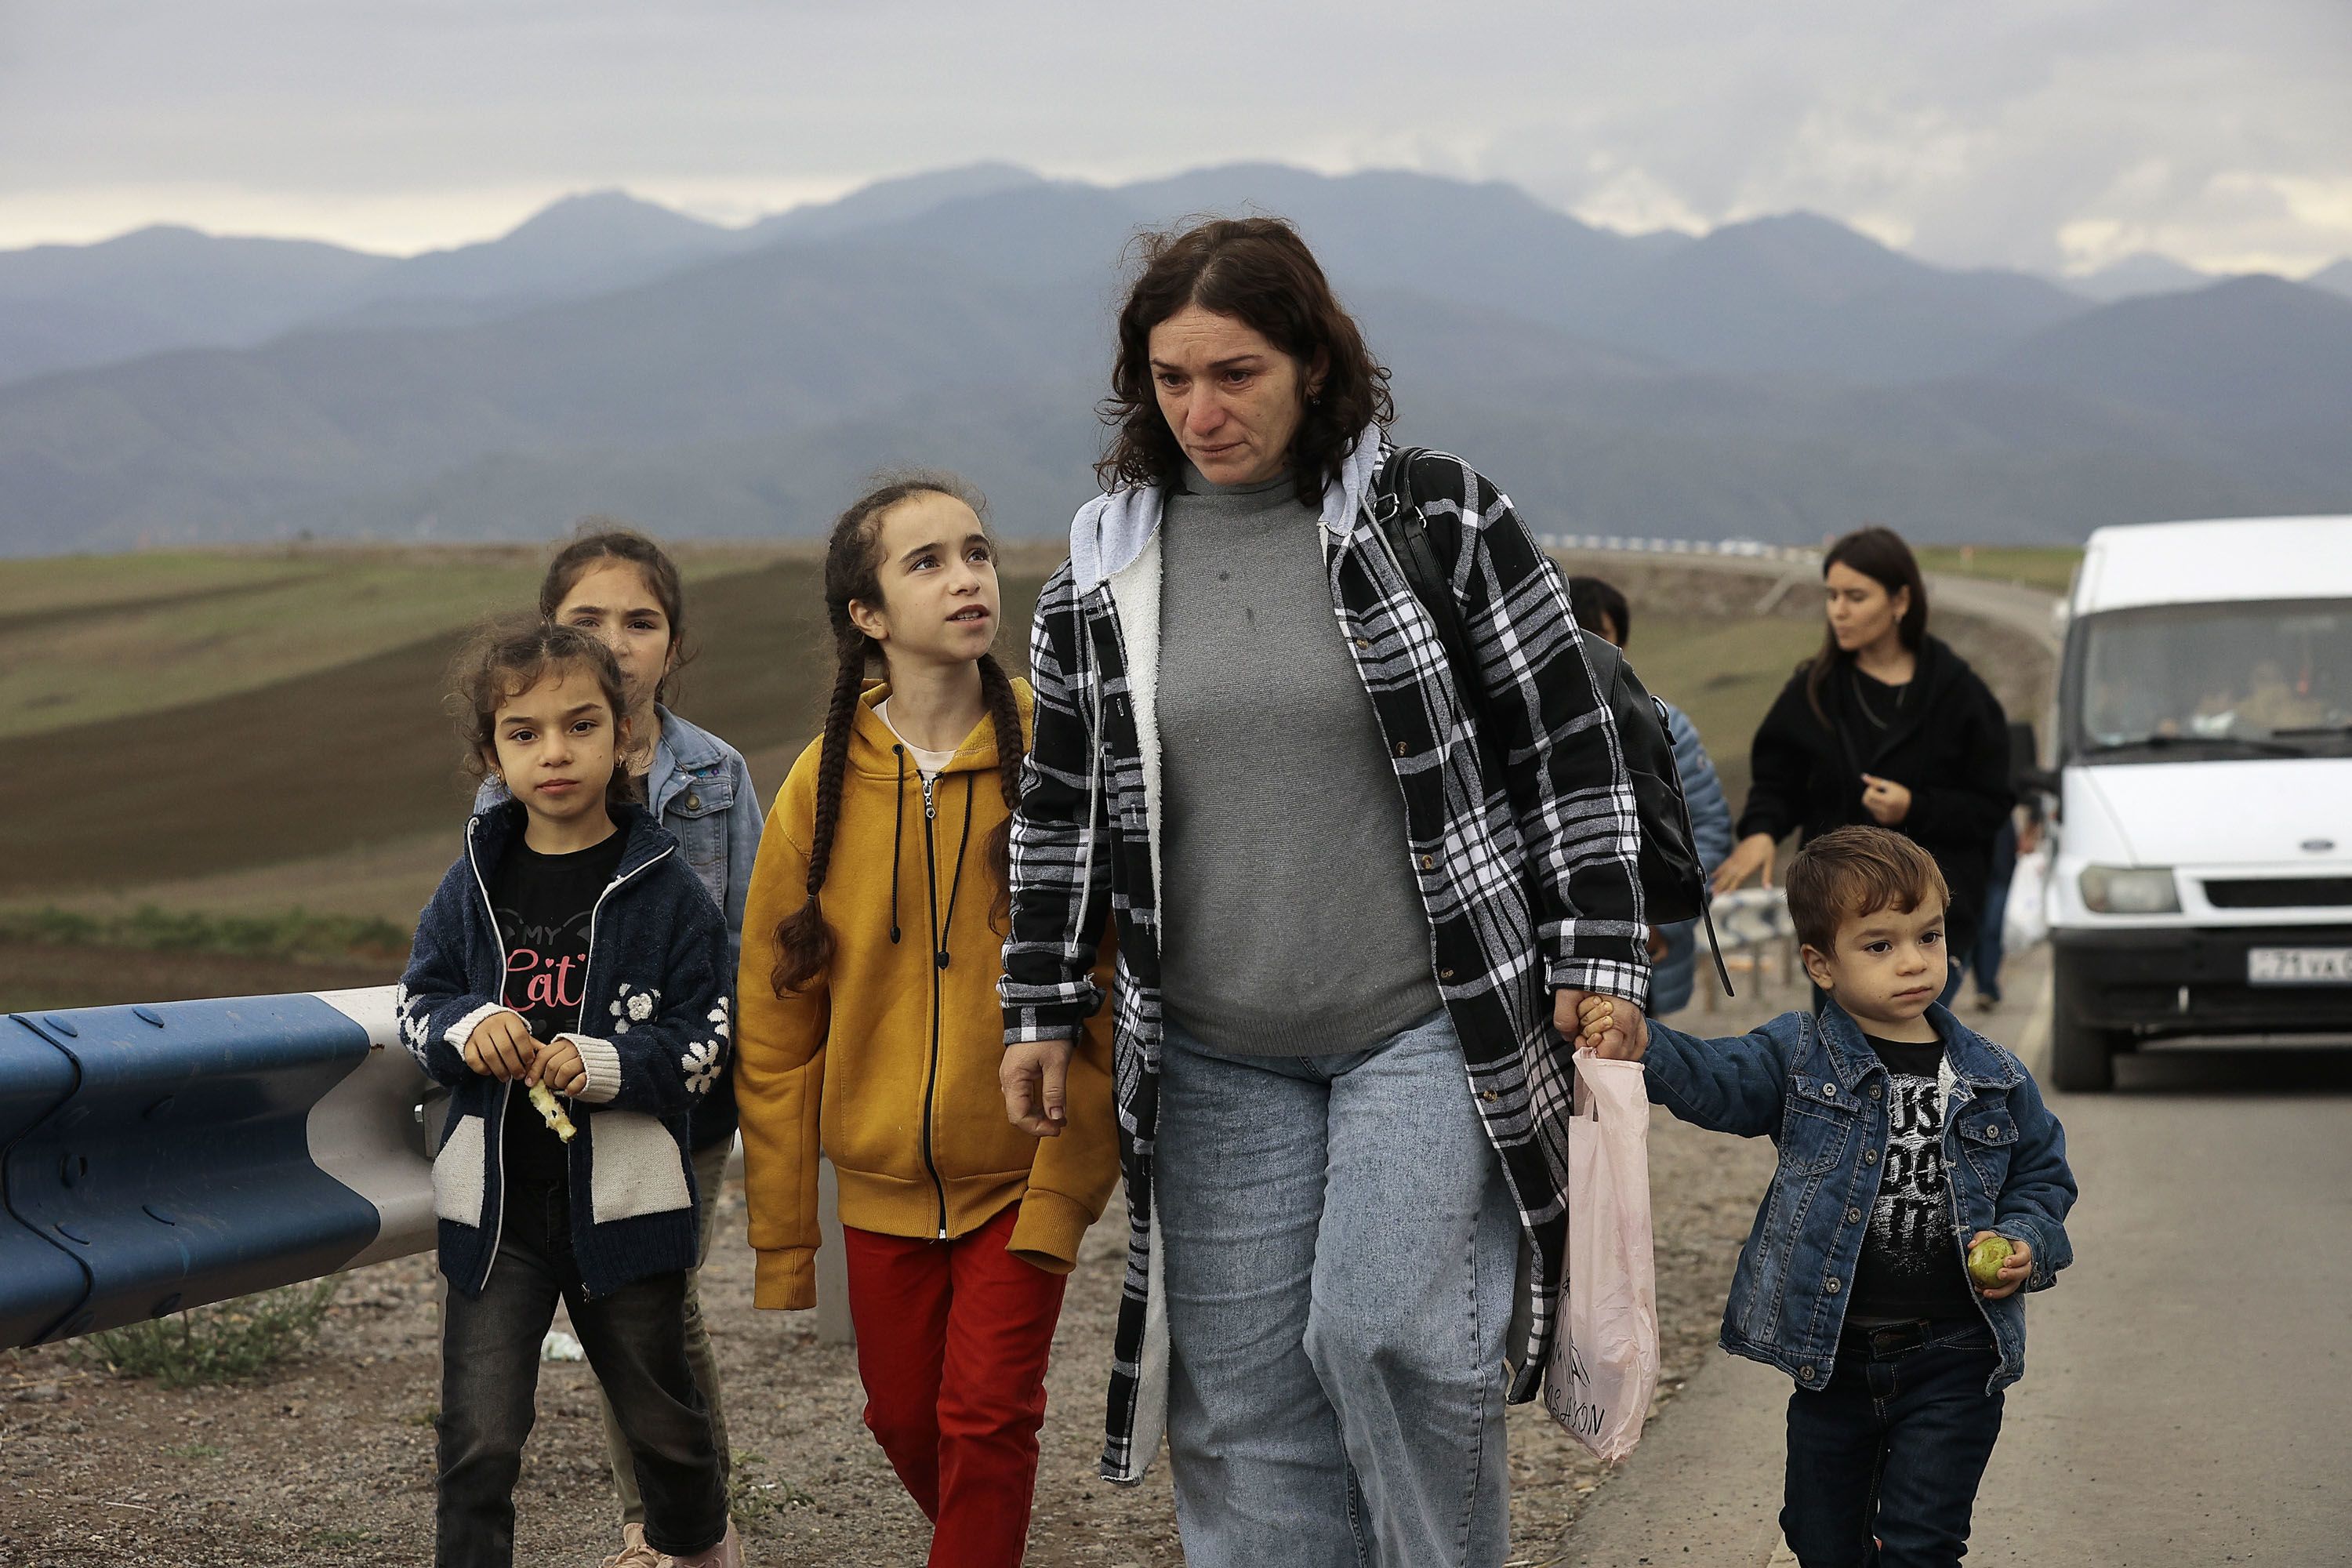 More than 80% of Nagorno-Karabakh's population flees as future uncertain  for those who remain